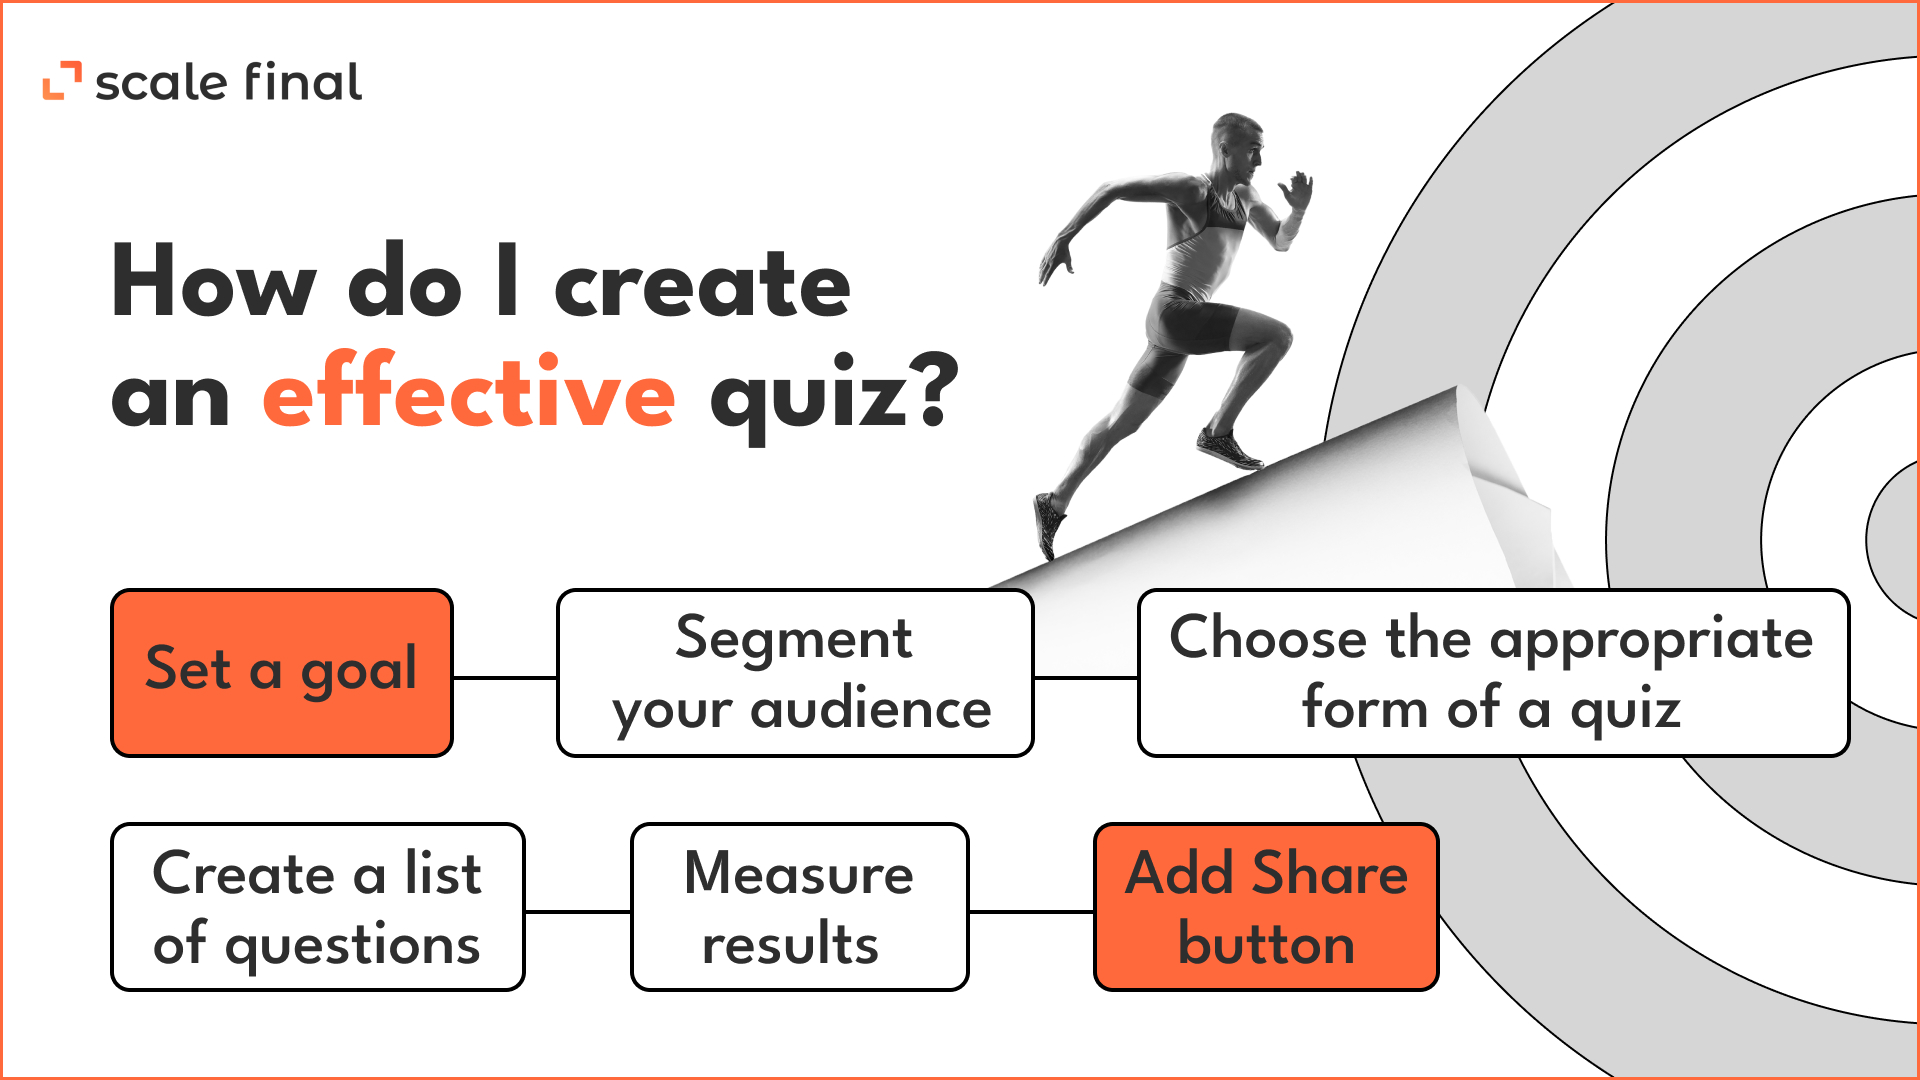 How do I create an effective quiz?Set a goalSegment your audience Choose the appropriate form of a quizCreate a list of questionsMeasure results Add Share button